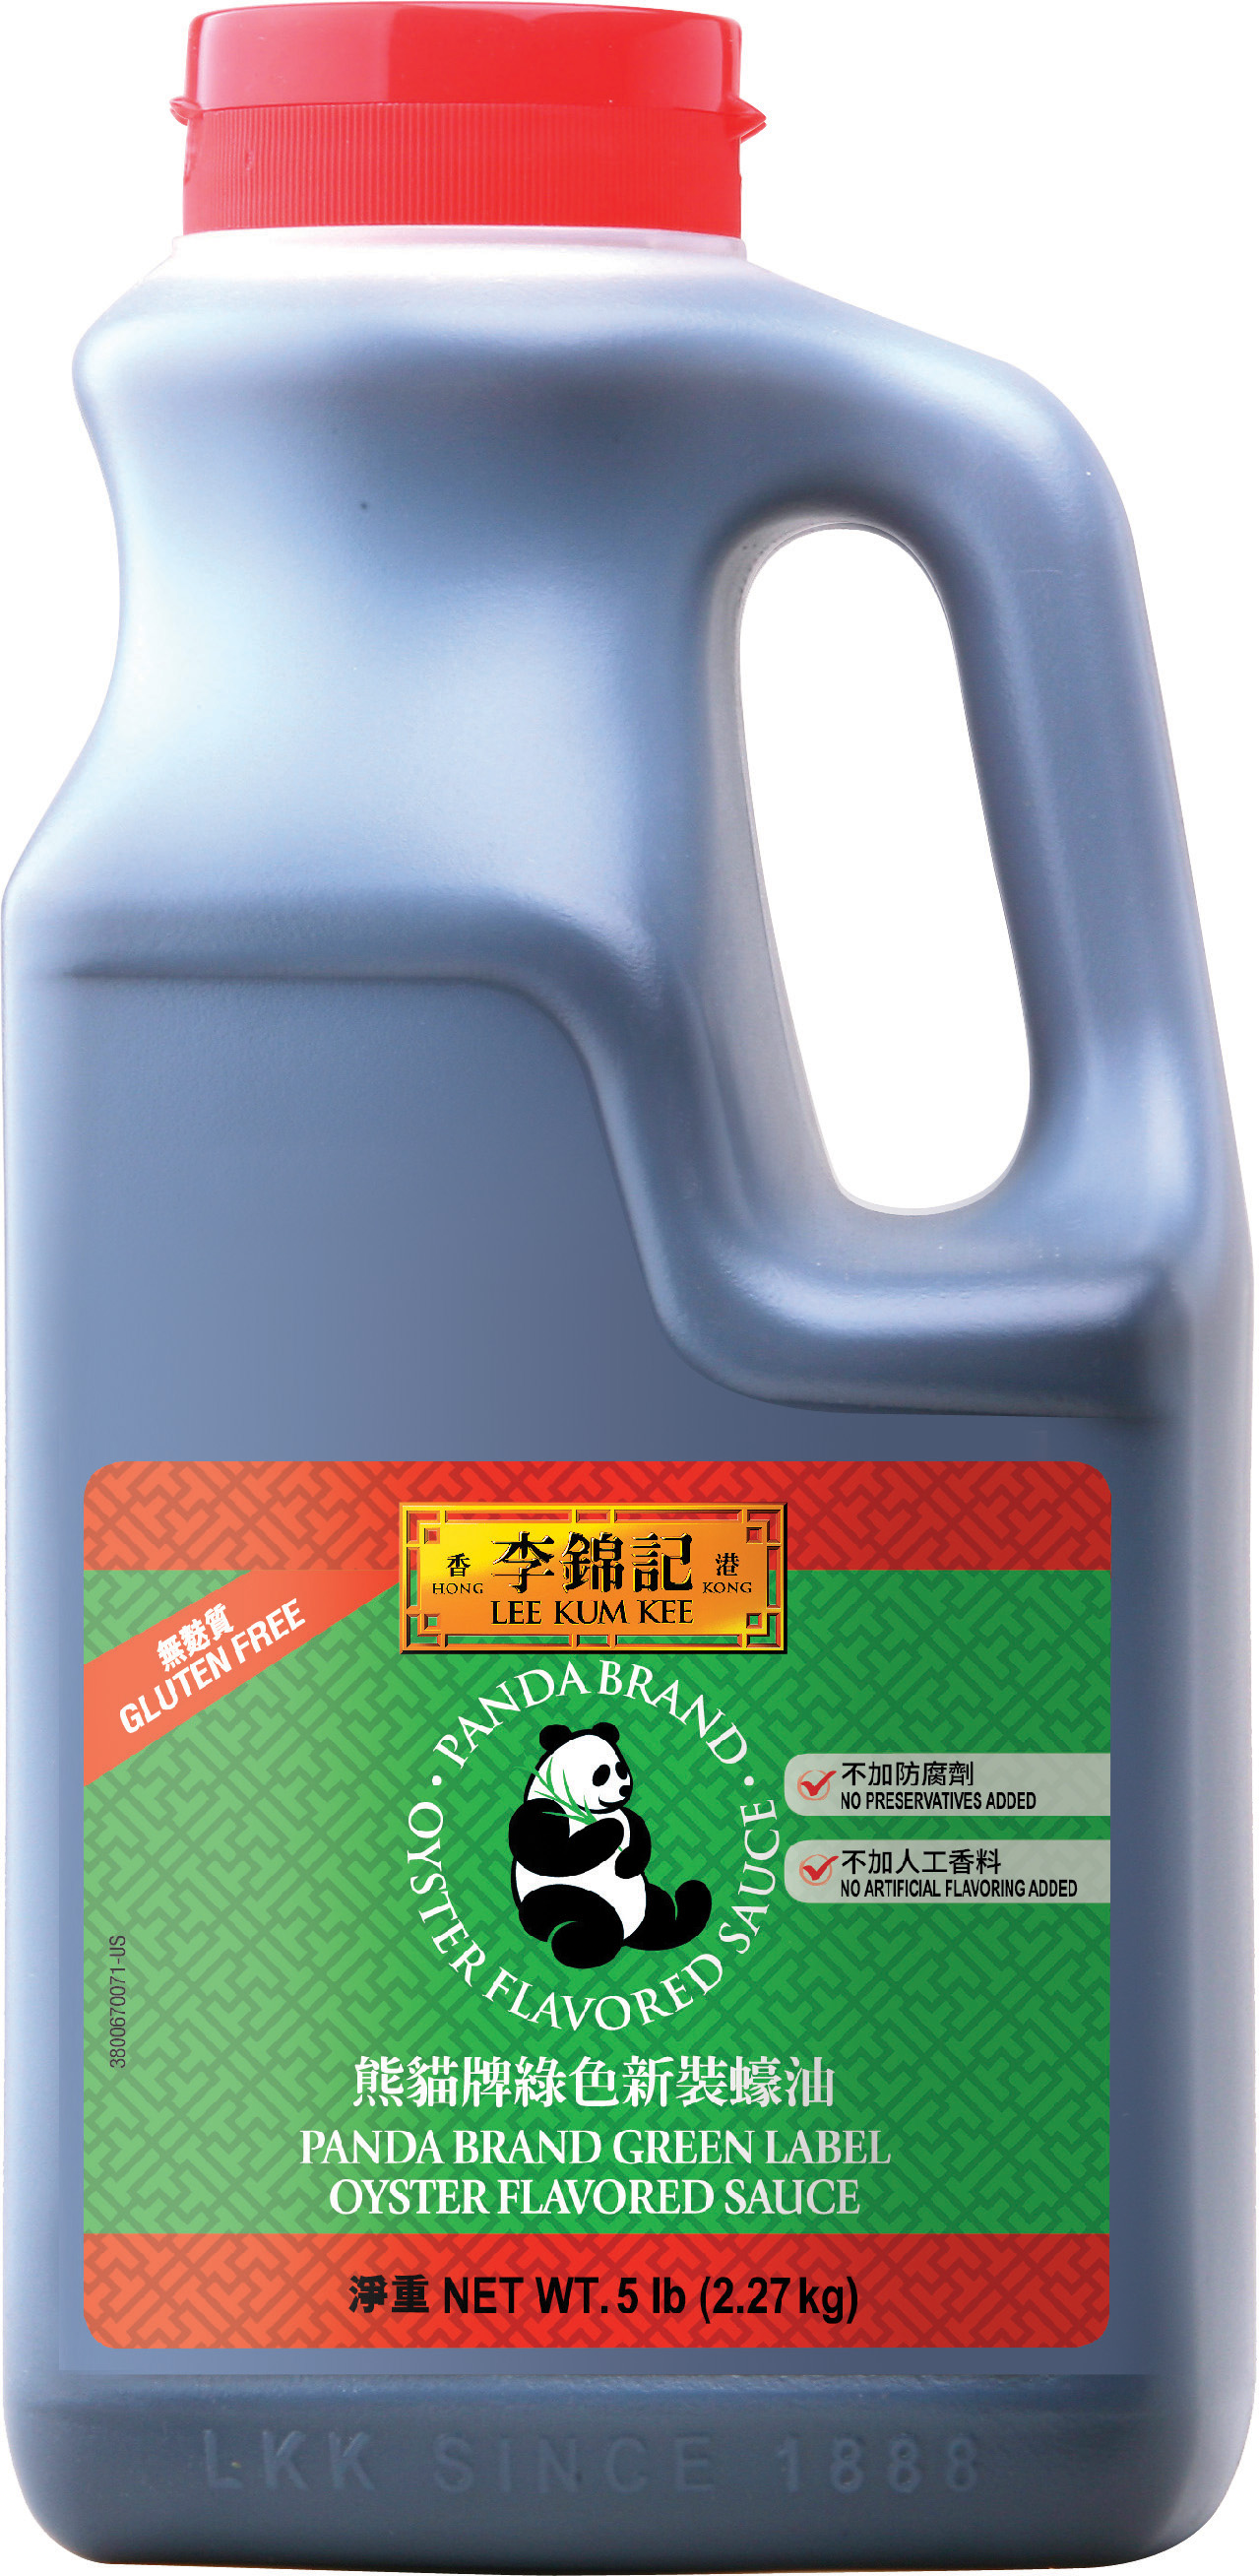 Panda Brand Green Label Oyster Flavored Sauce 5 lb (2.27 kg) Pail